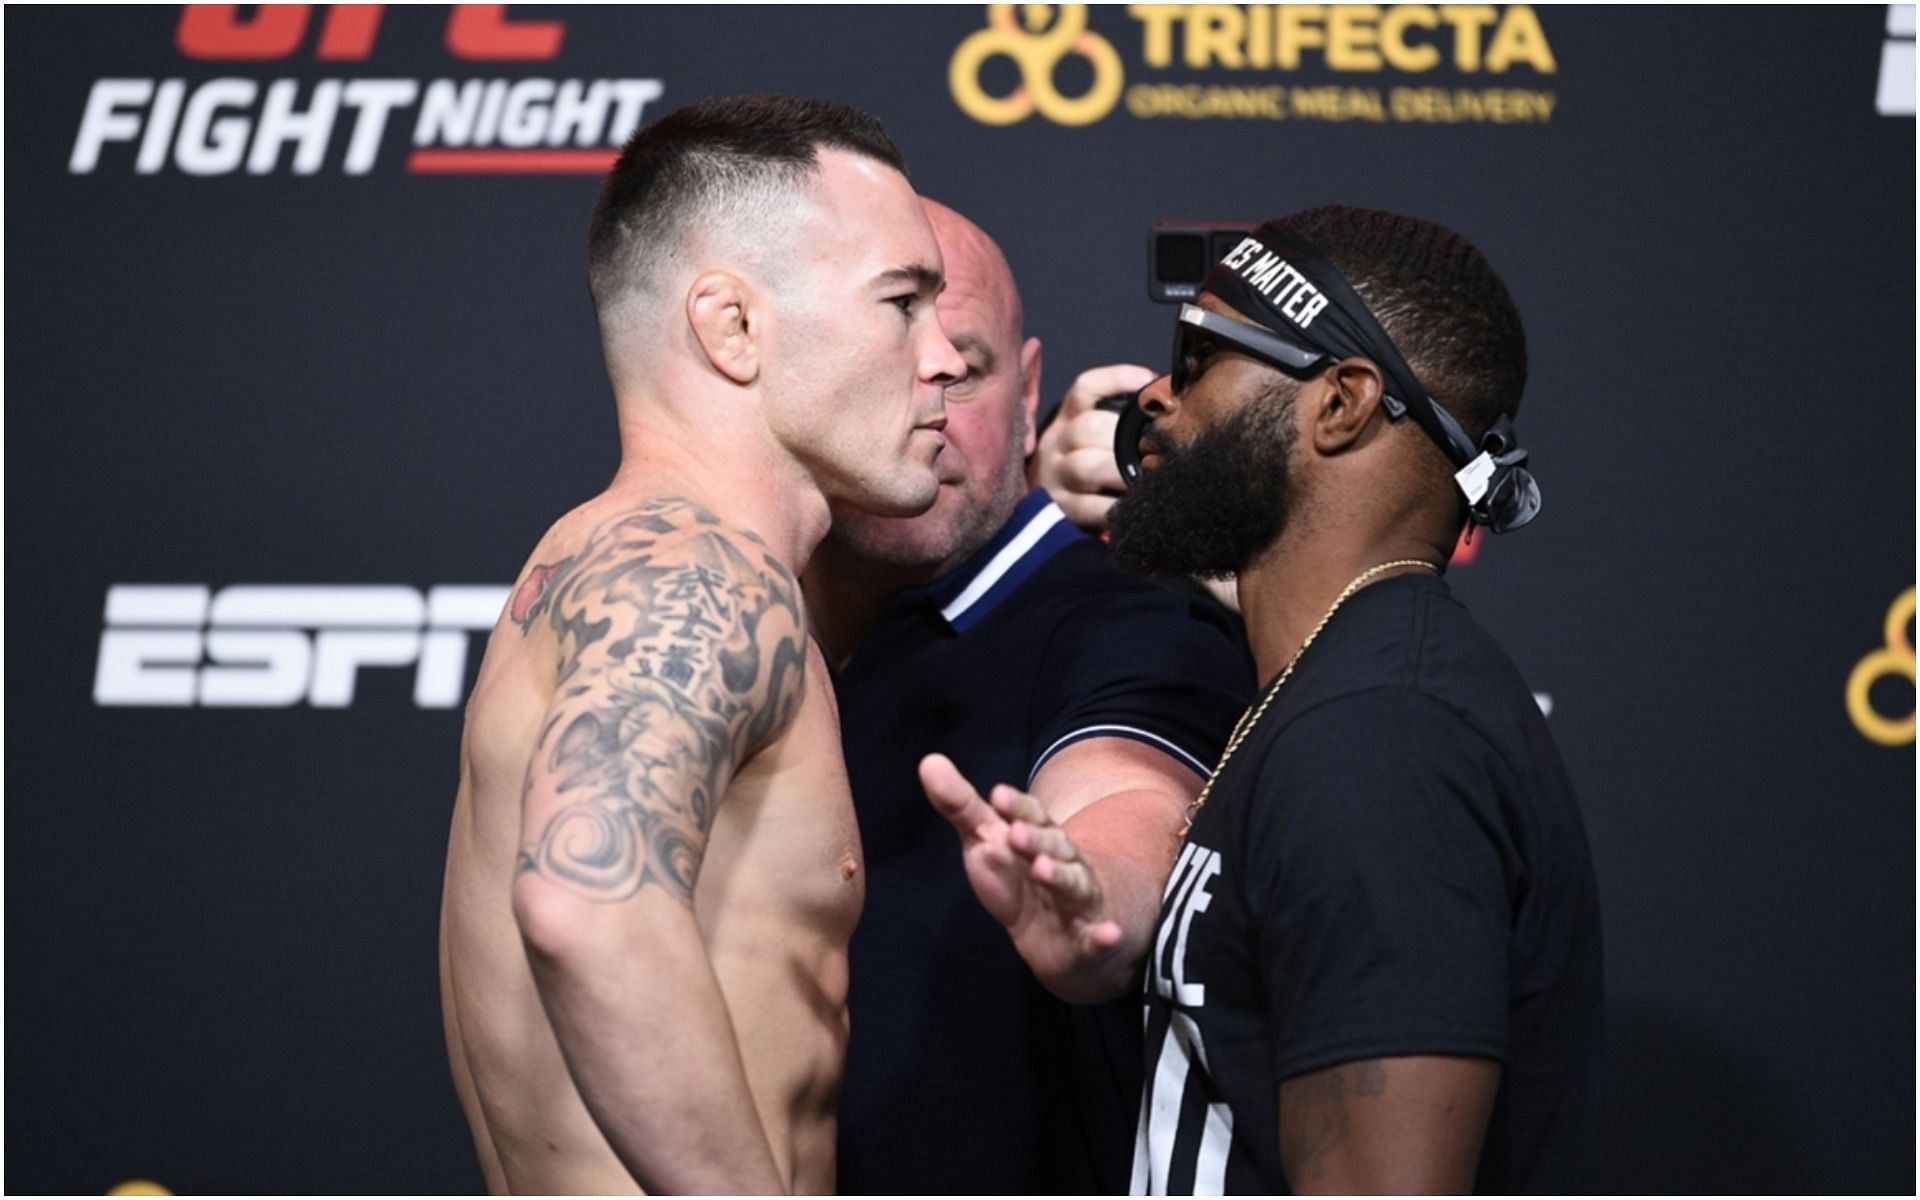 Colby Covington and Tyron Woodley face off